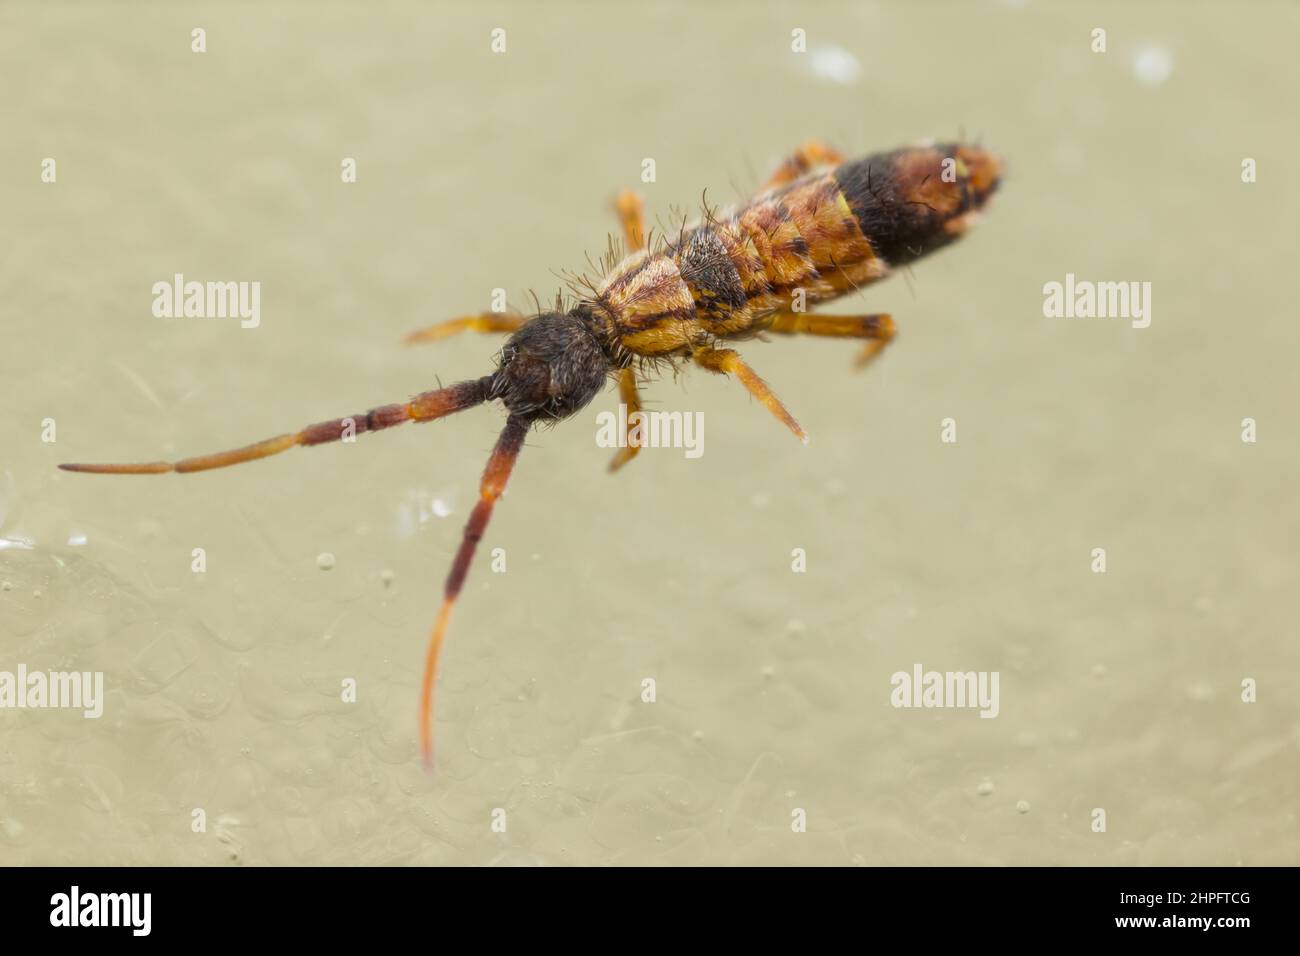 Slender springtail (Orchesella flavescens) walking on ice Stock Photo